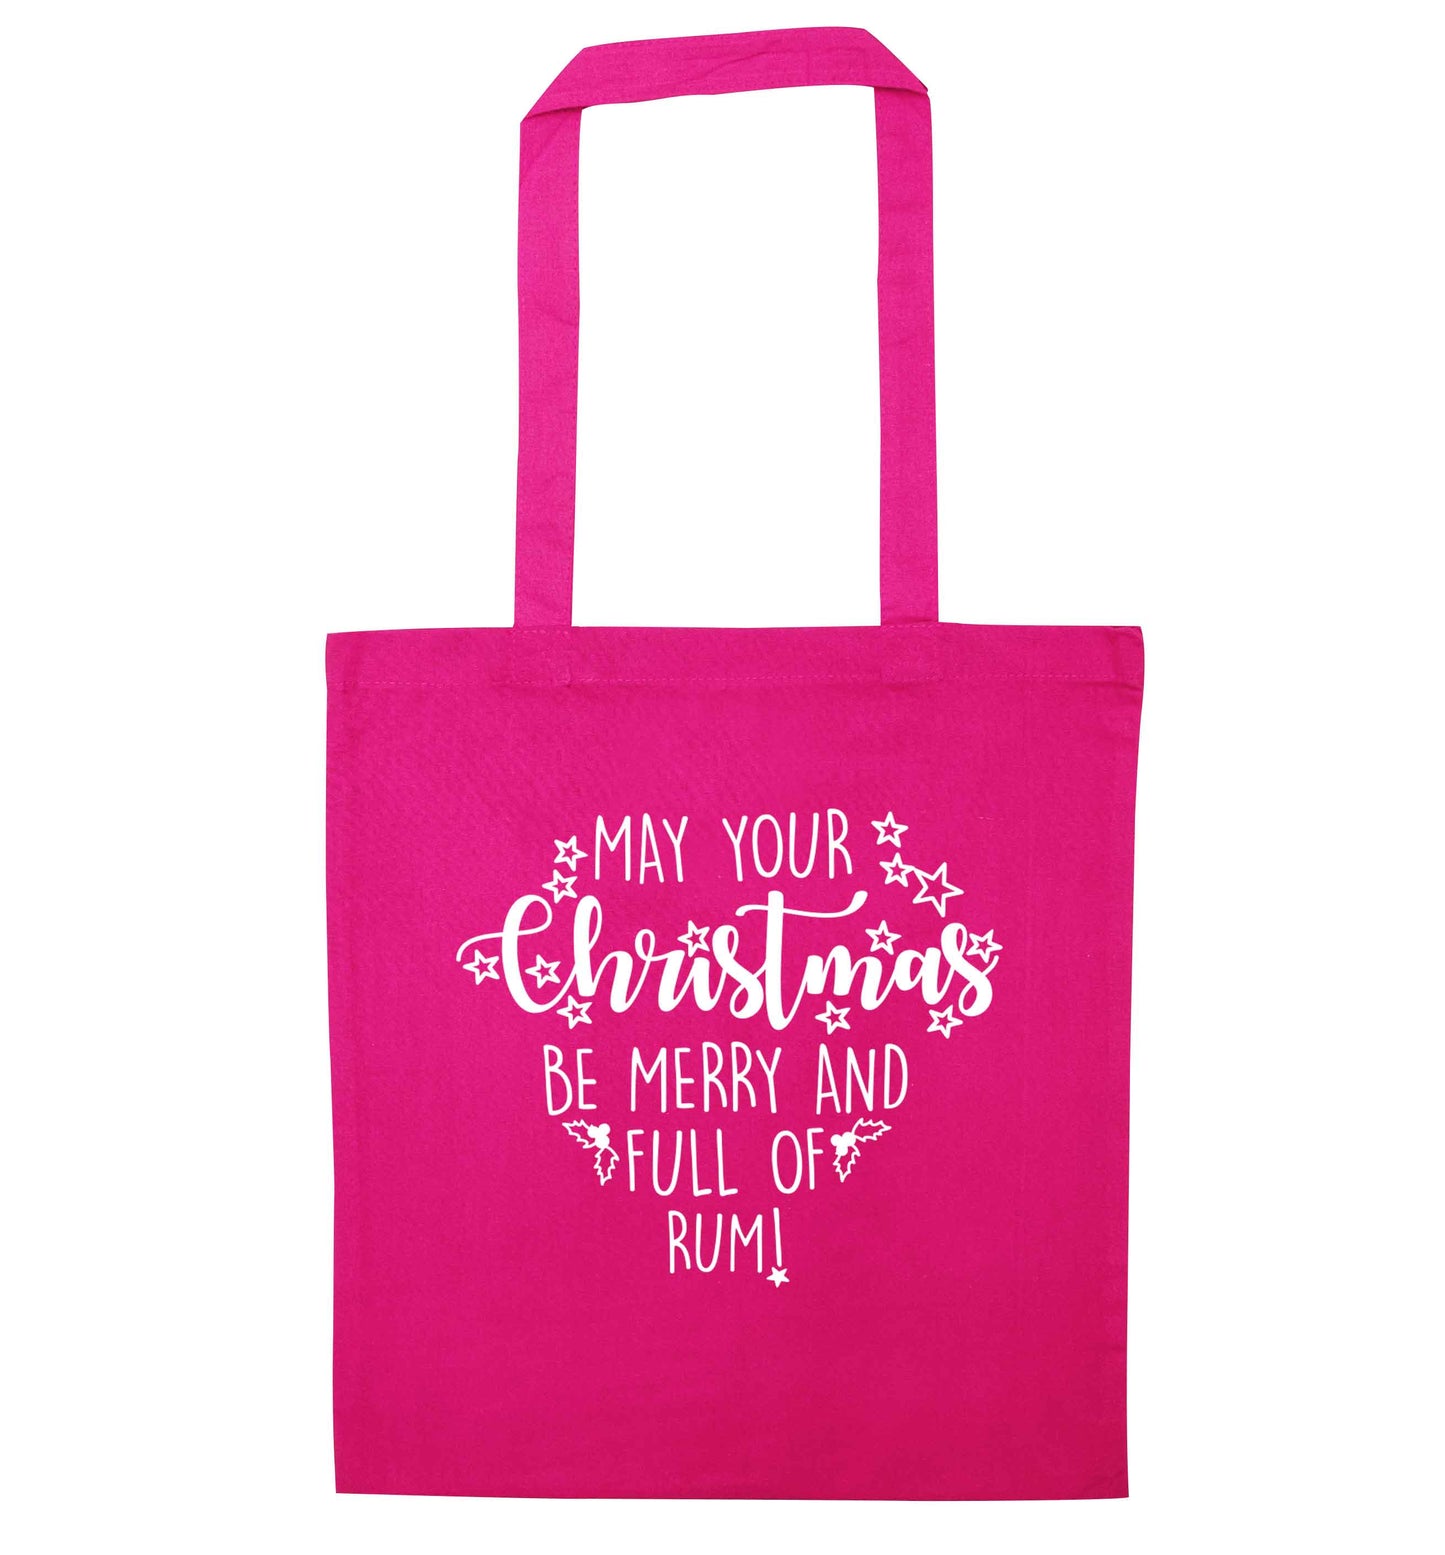 May your Christmas be merry and full of rum pink tote bag